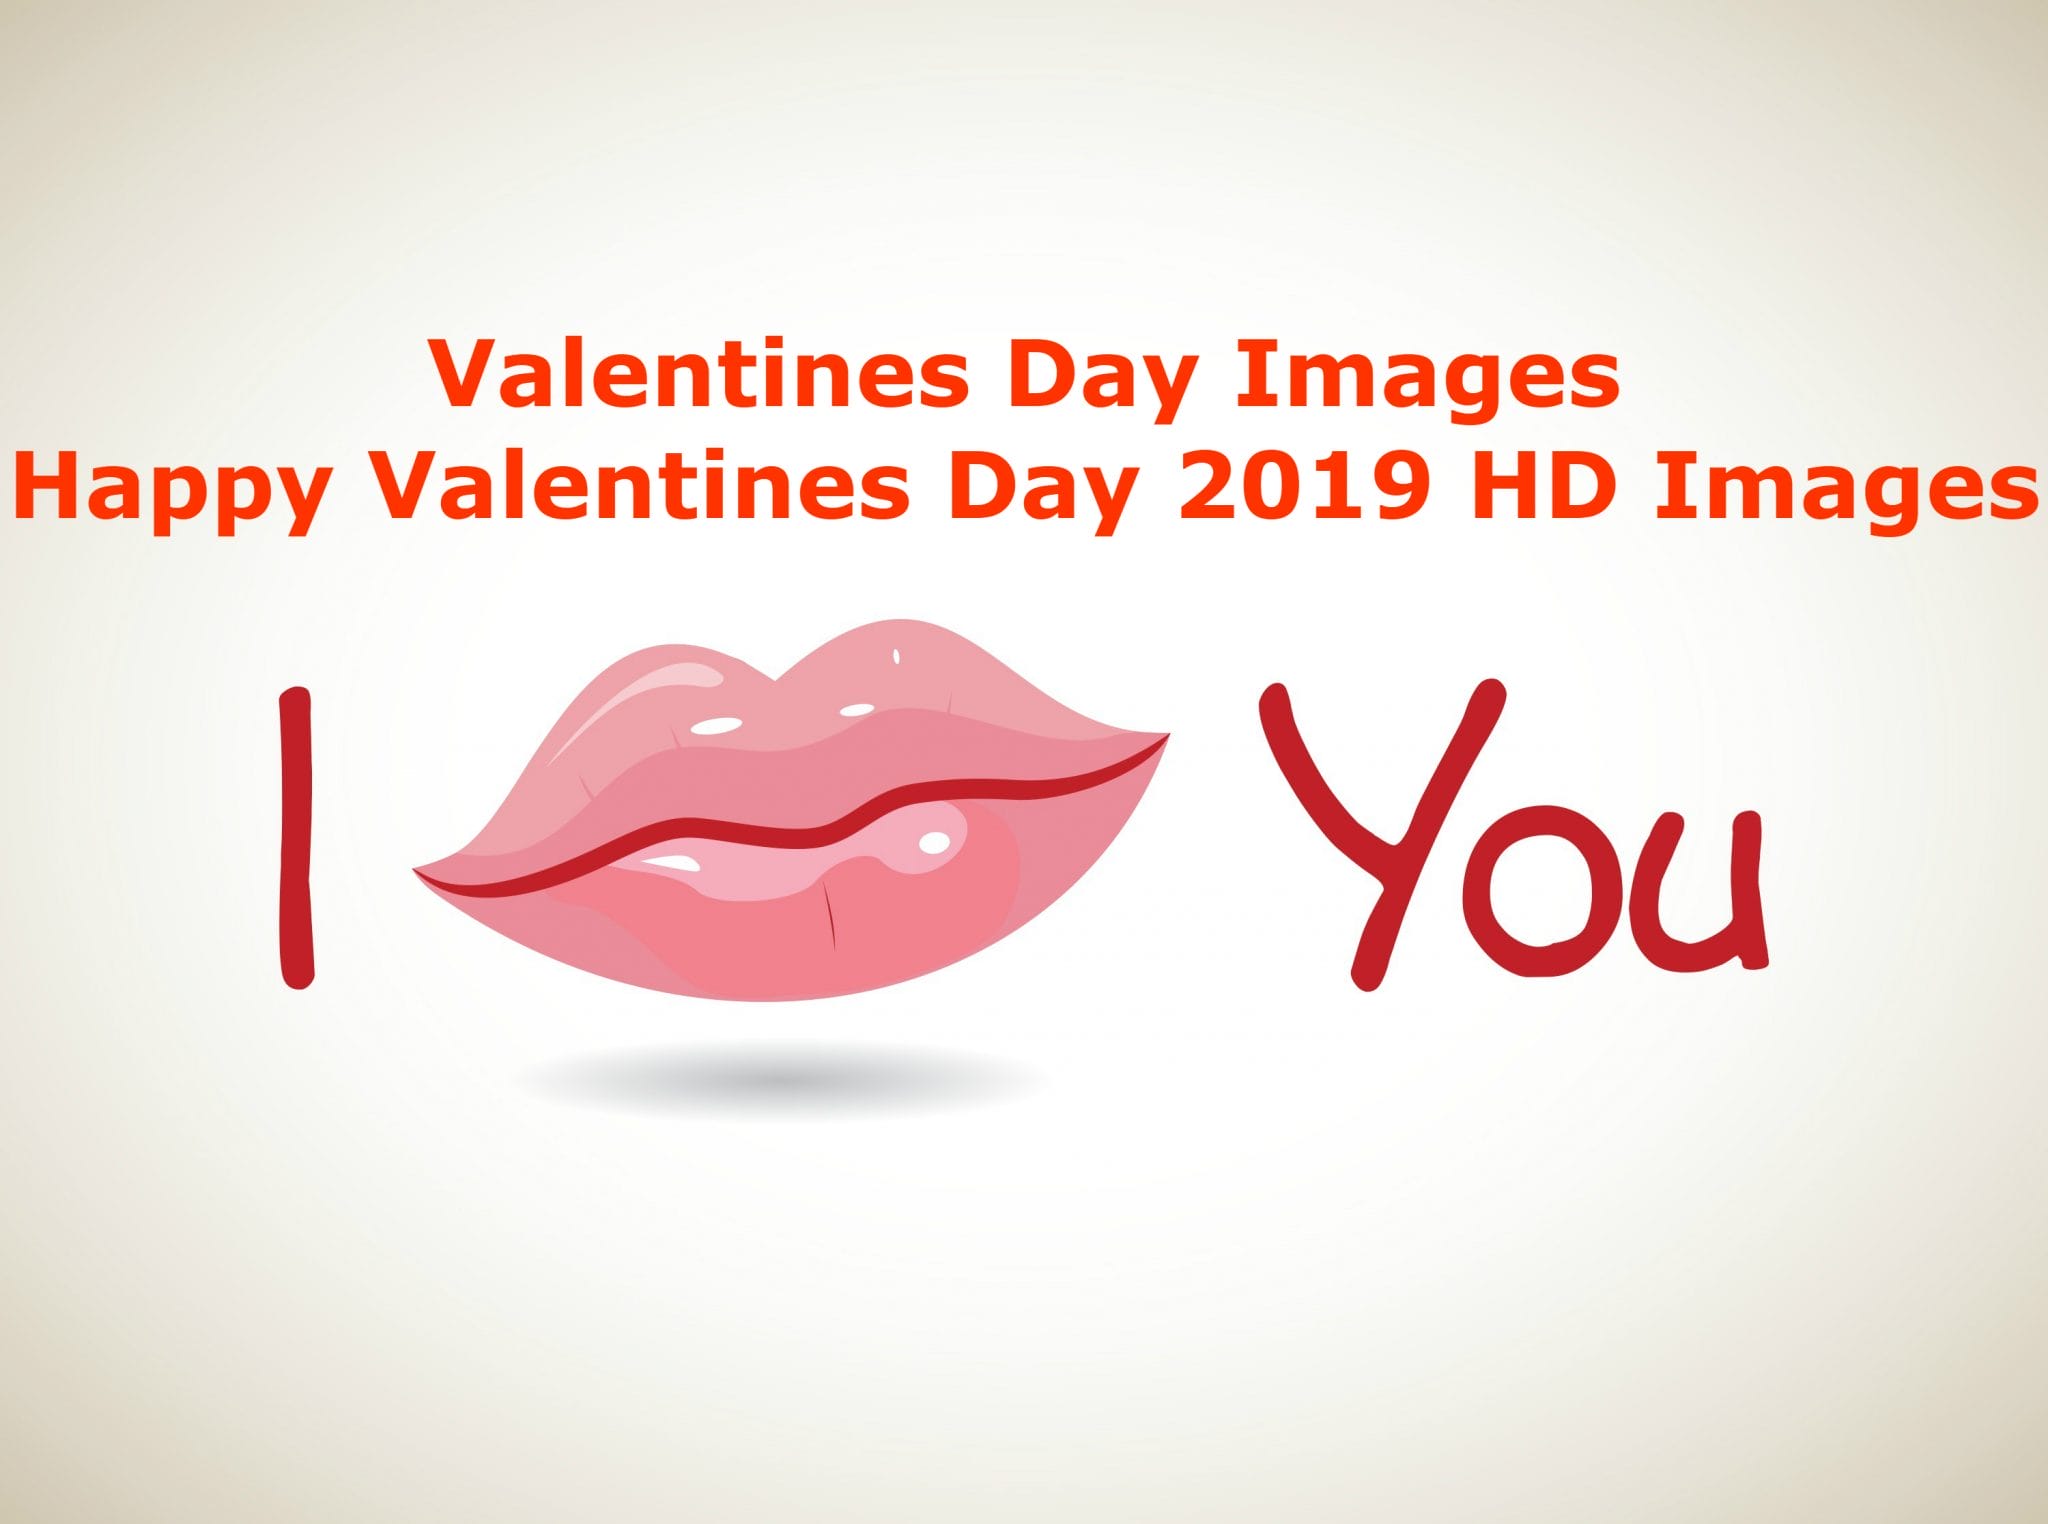 Valentines Day Images Happy Valentines Day 2019 HD Images